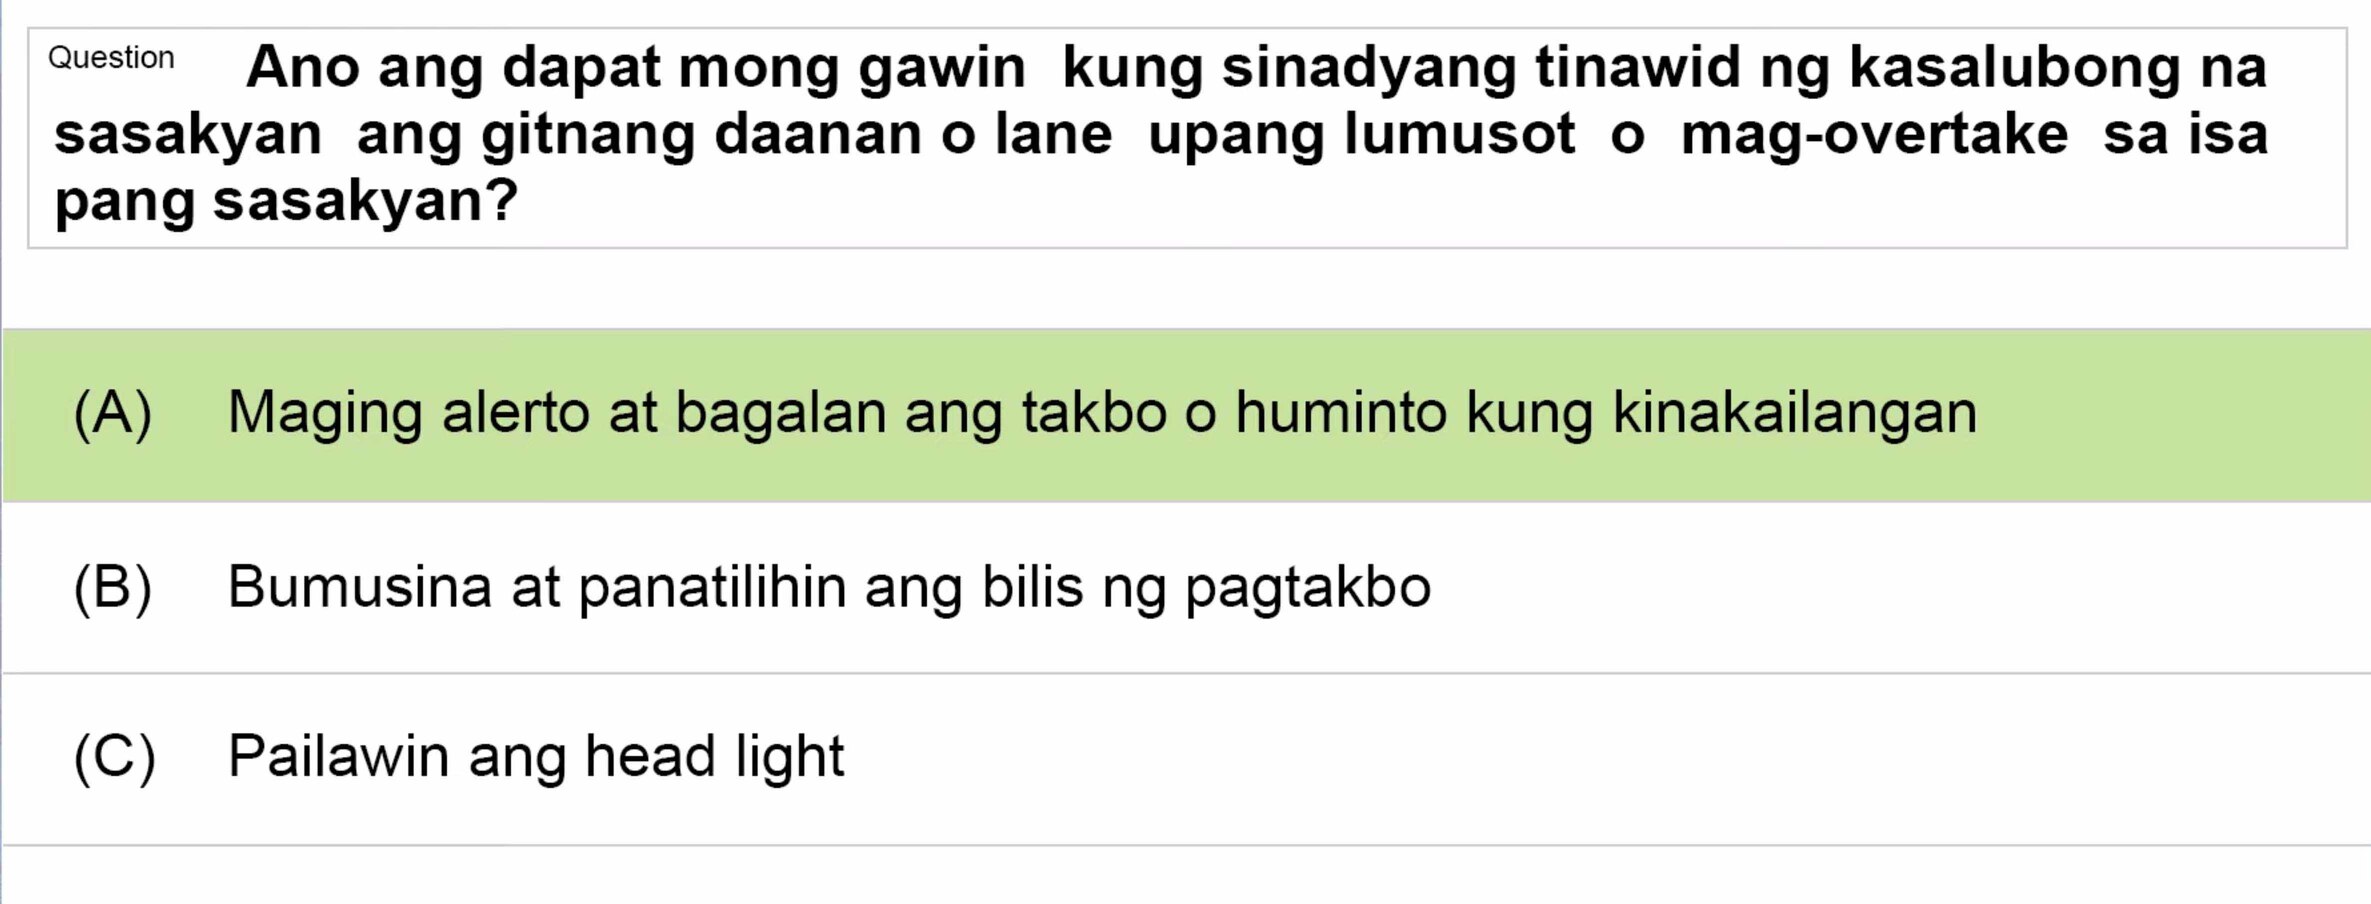 LTO Tagalog non professional exam reviewer light vehicle 3 (18)